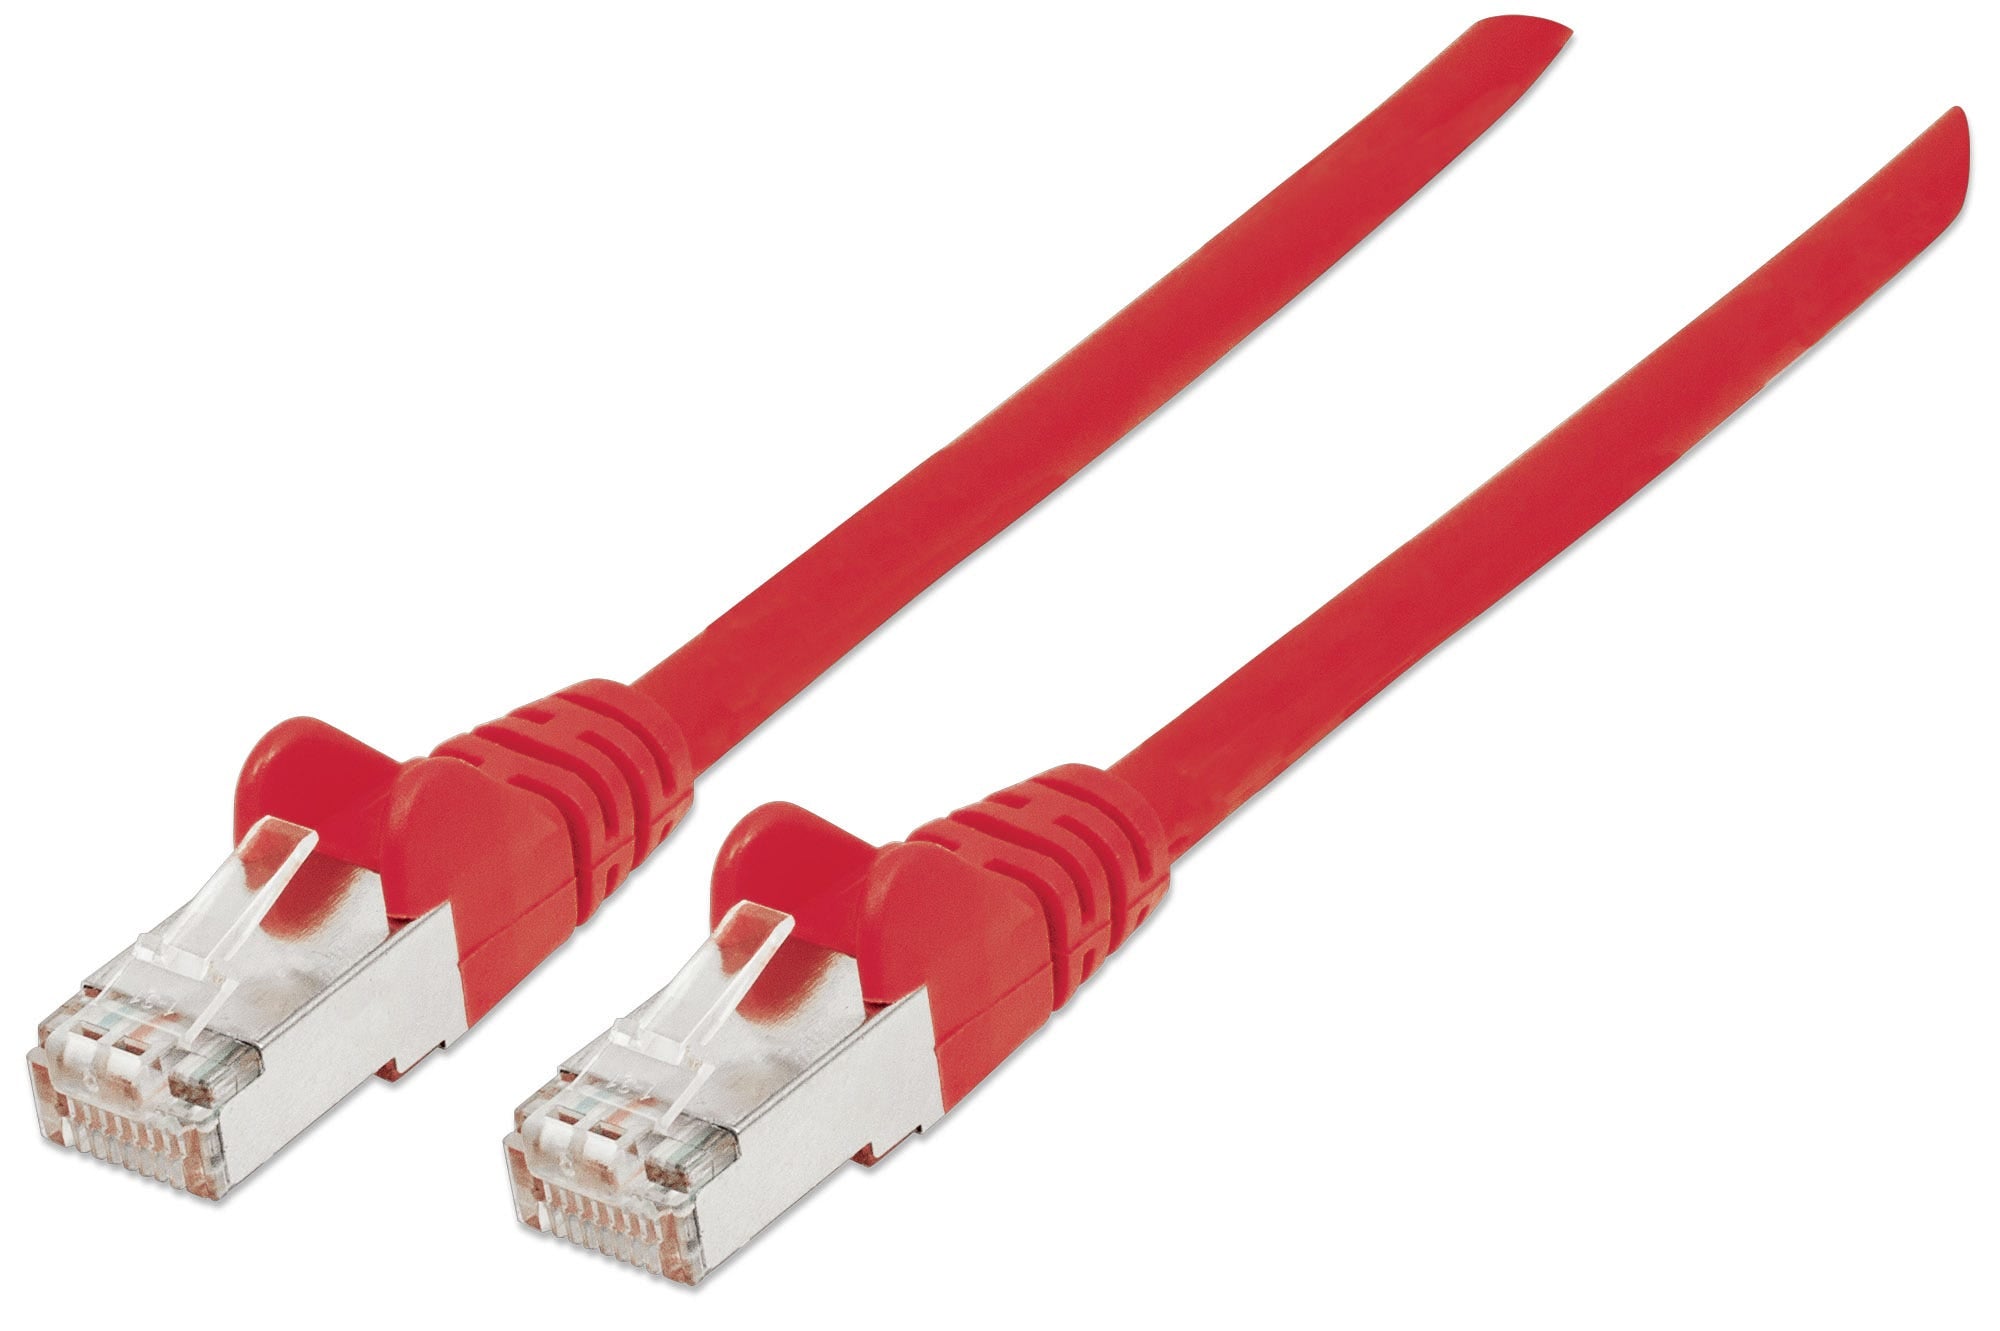 Intellinet Network Patch Cable, Cat6, 1m, Red, Copper, S/FTP, LSOH / LSZH, PVC, RJ45, Gold Plated Contacts, Snagless, Booted, Lifetime Warranty, Polybag